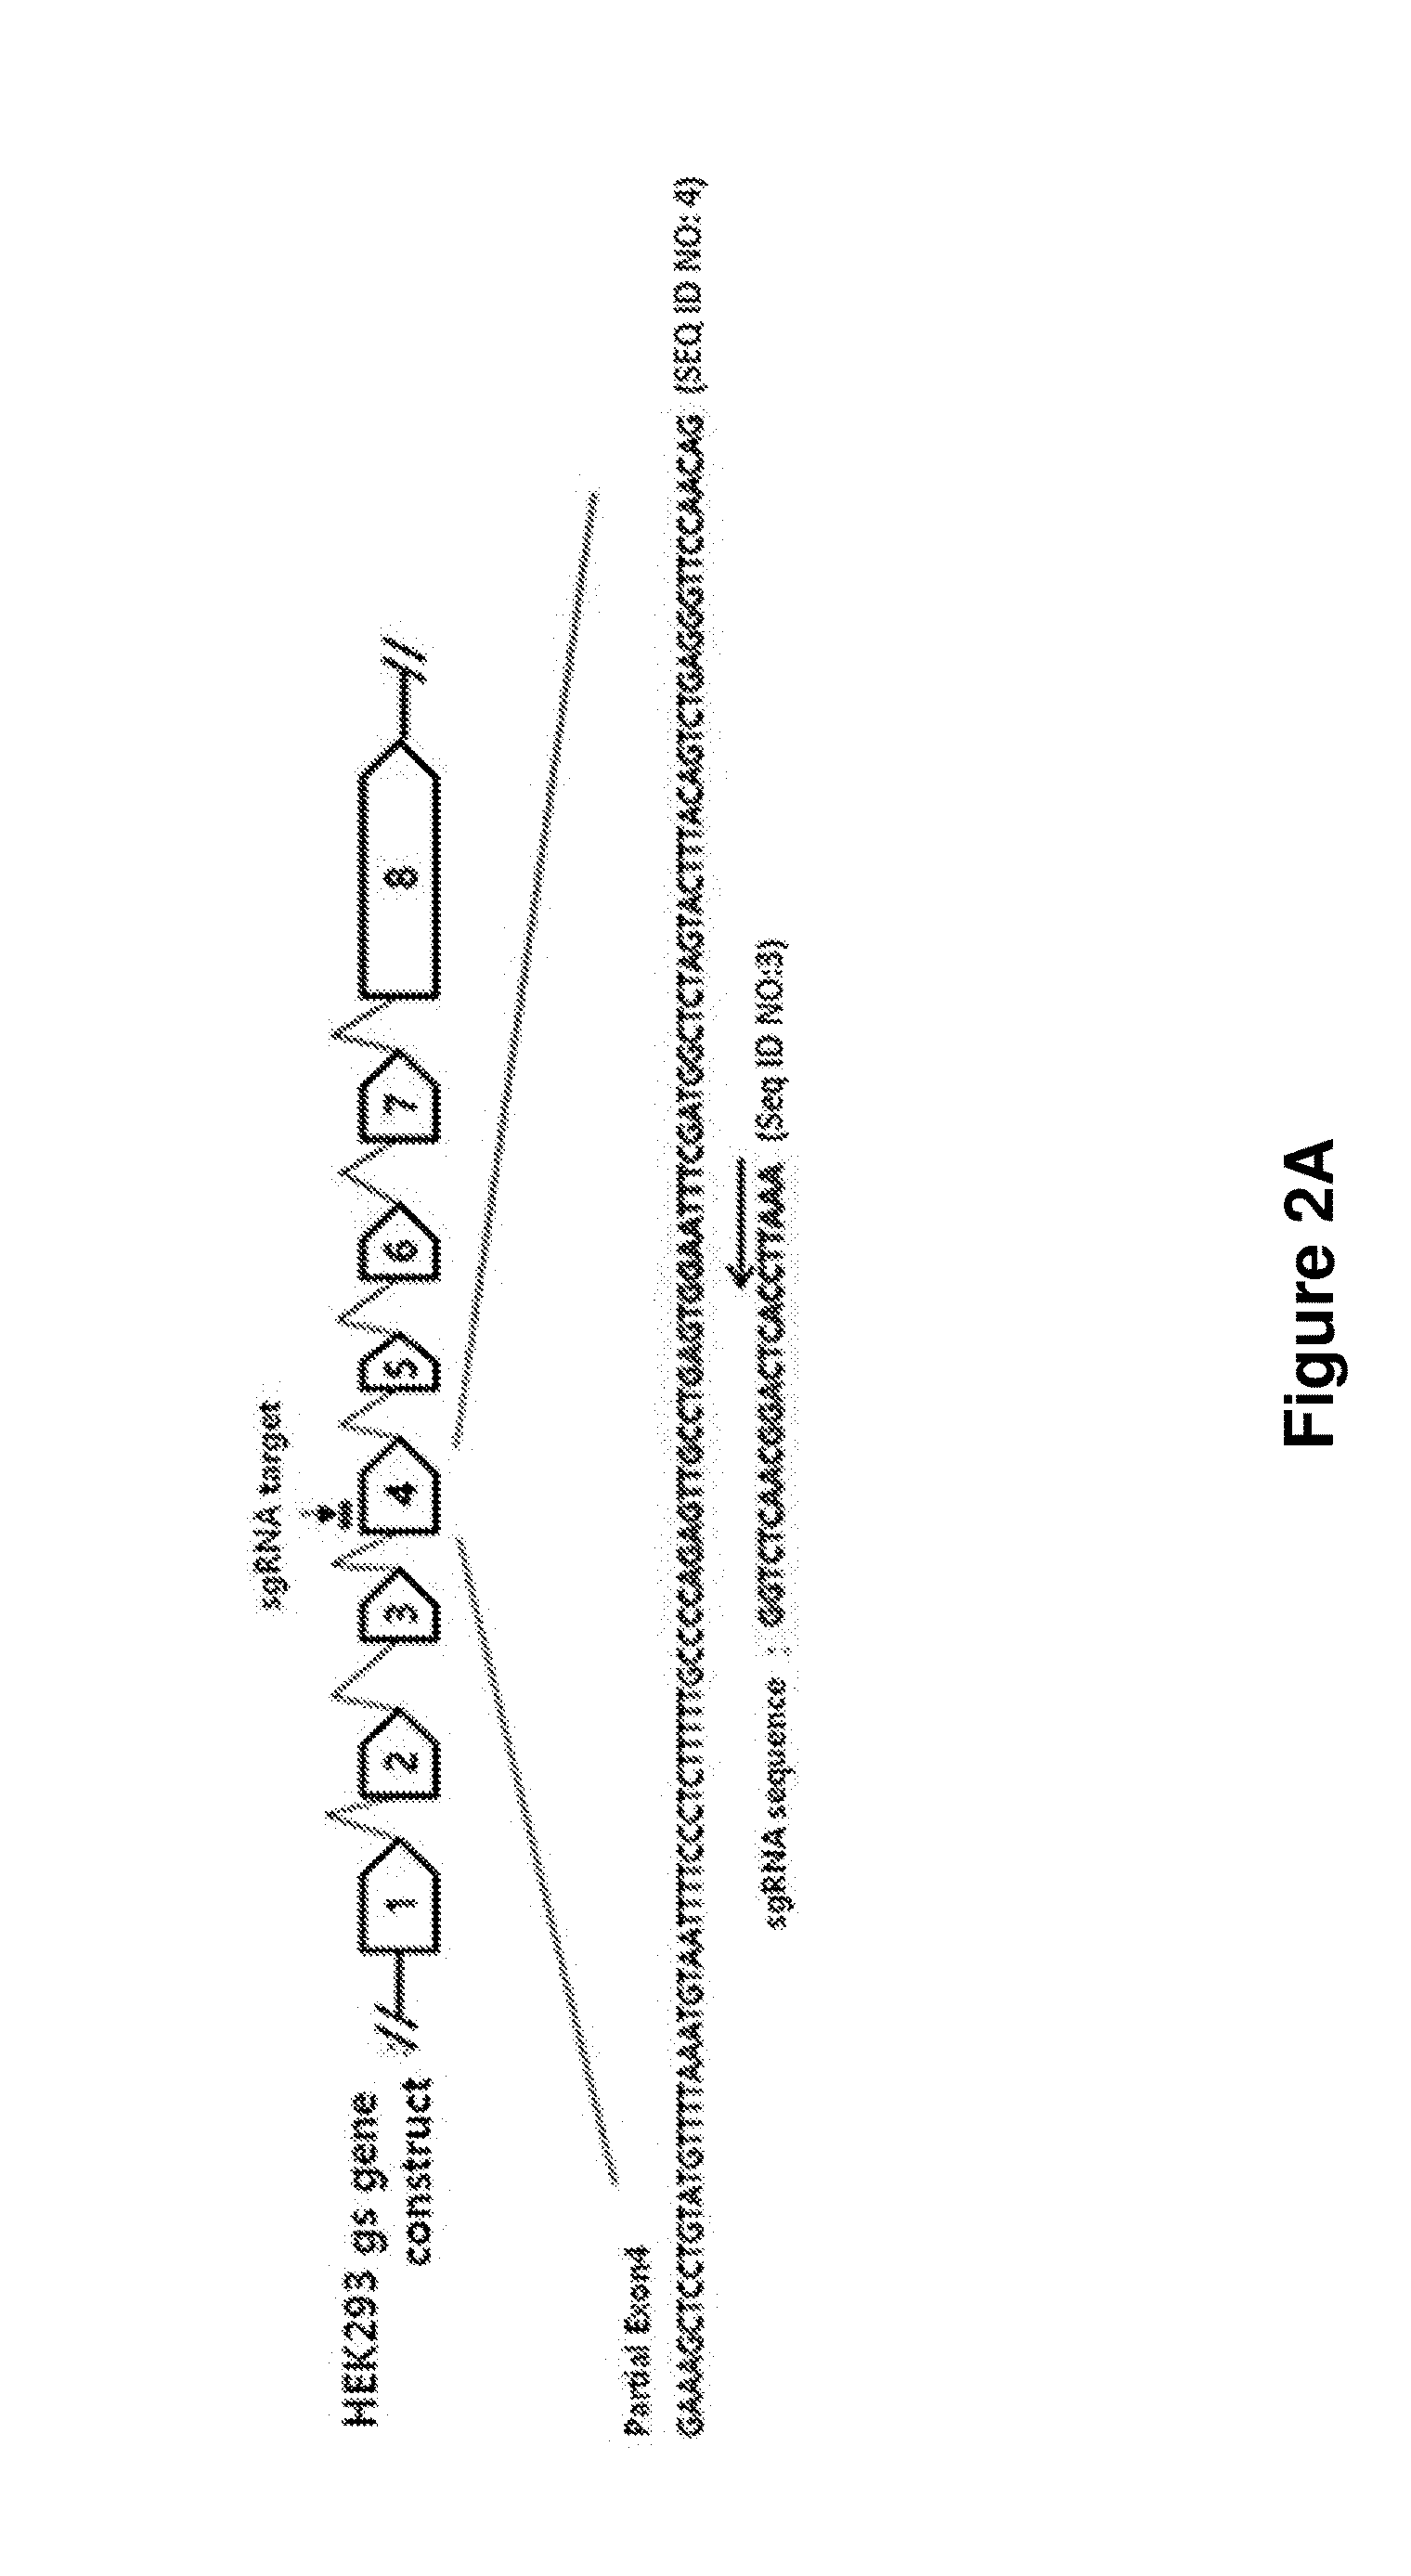 Cell line containing a knockout of the glutamine synthetase (GS) gene and a method of producing target proteins using a GS knockout HEK293 cell line